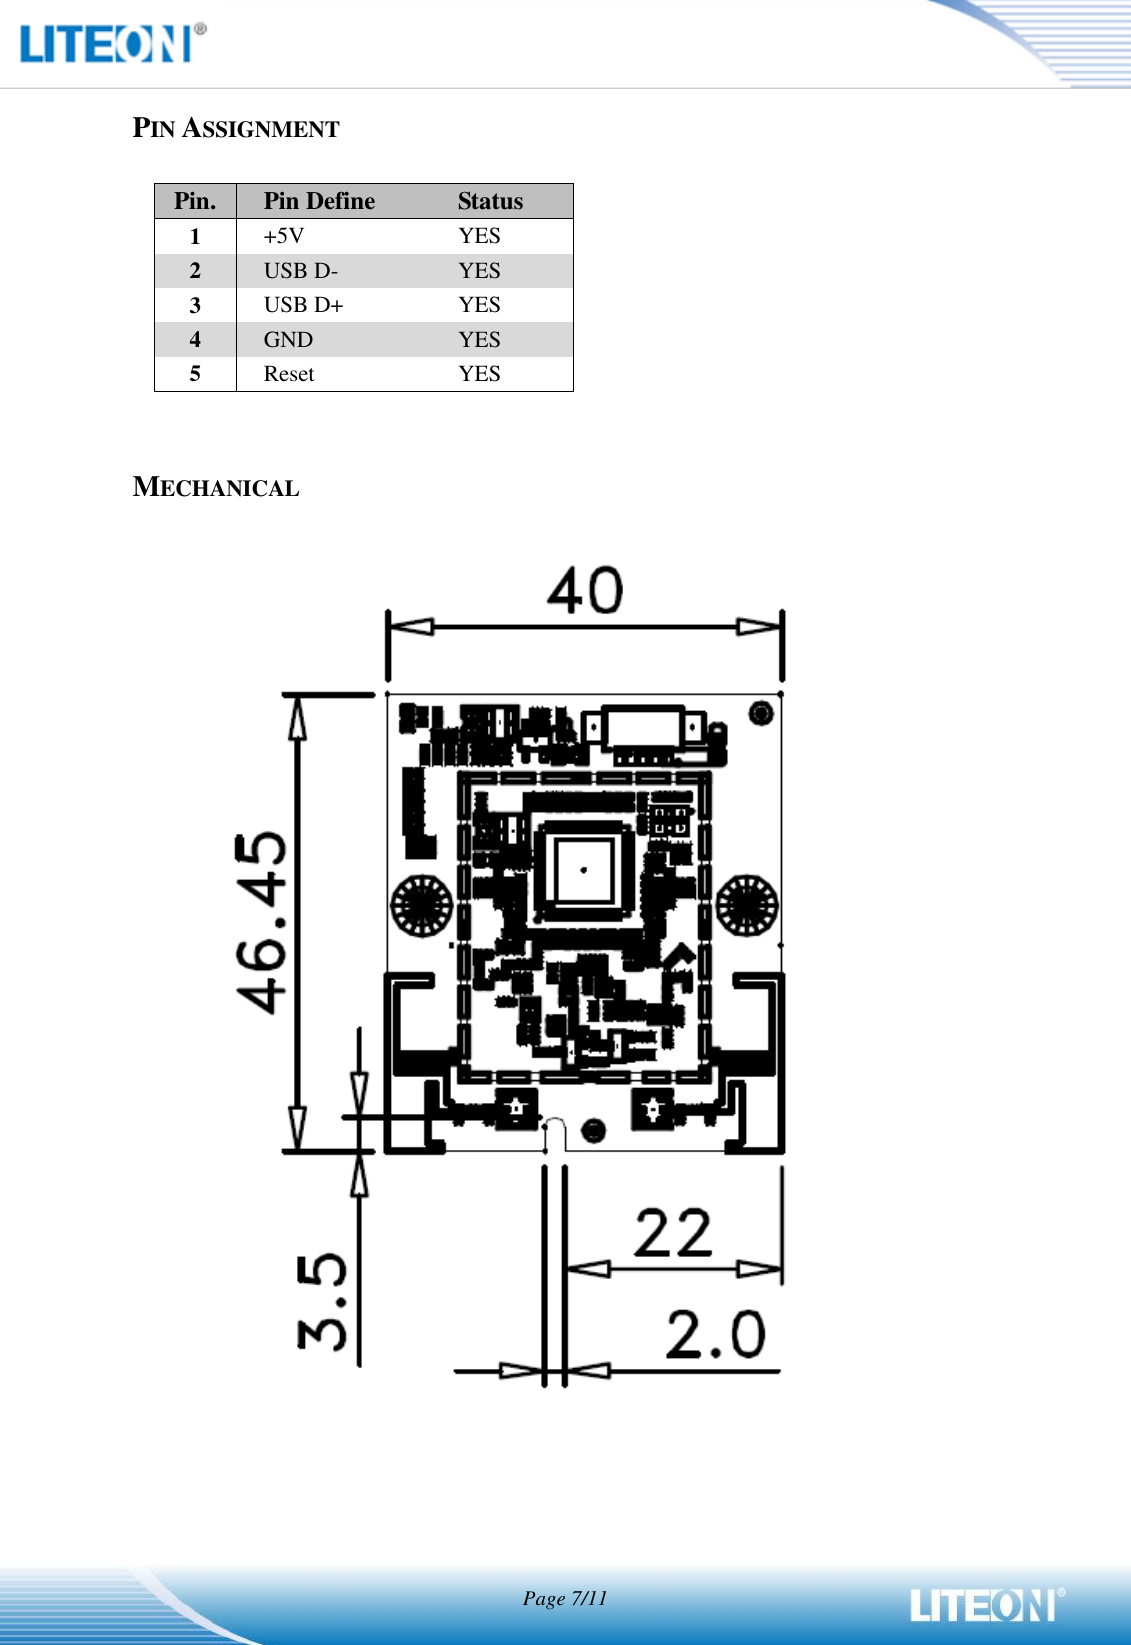  Page 7/11   PIN ASSIGNMENT  Pin. Pin Define Status 1 +5V YES 2 USB D- YES 3 USB D+ YES 4 GND YES 5 Reset YES   MECHANICAL          